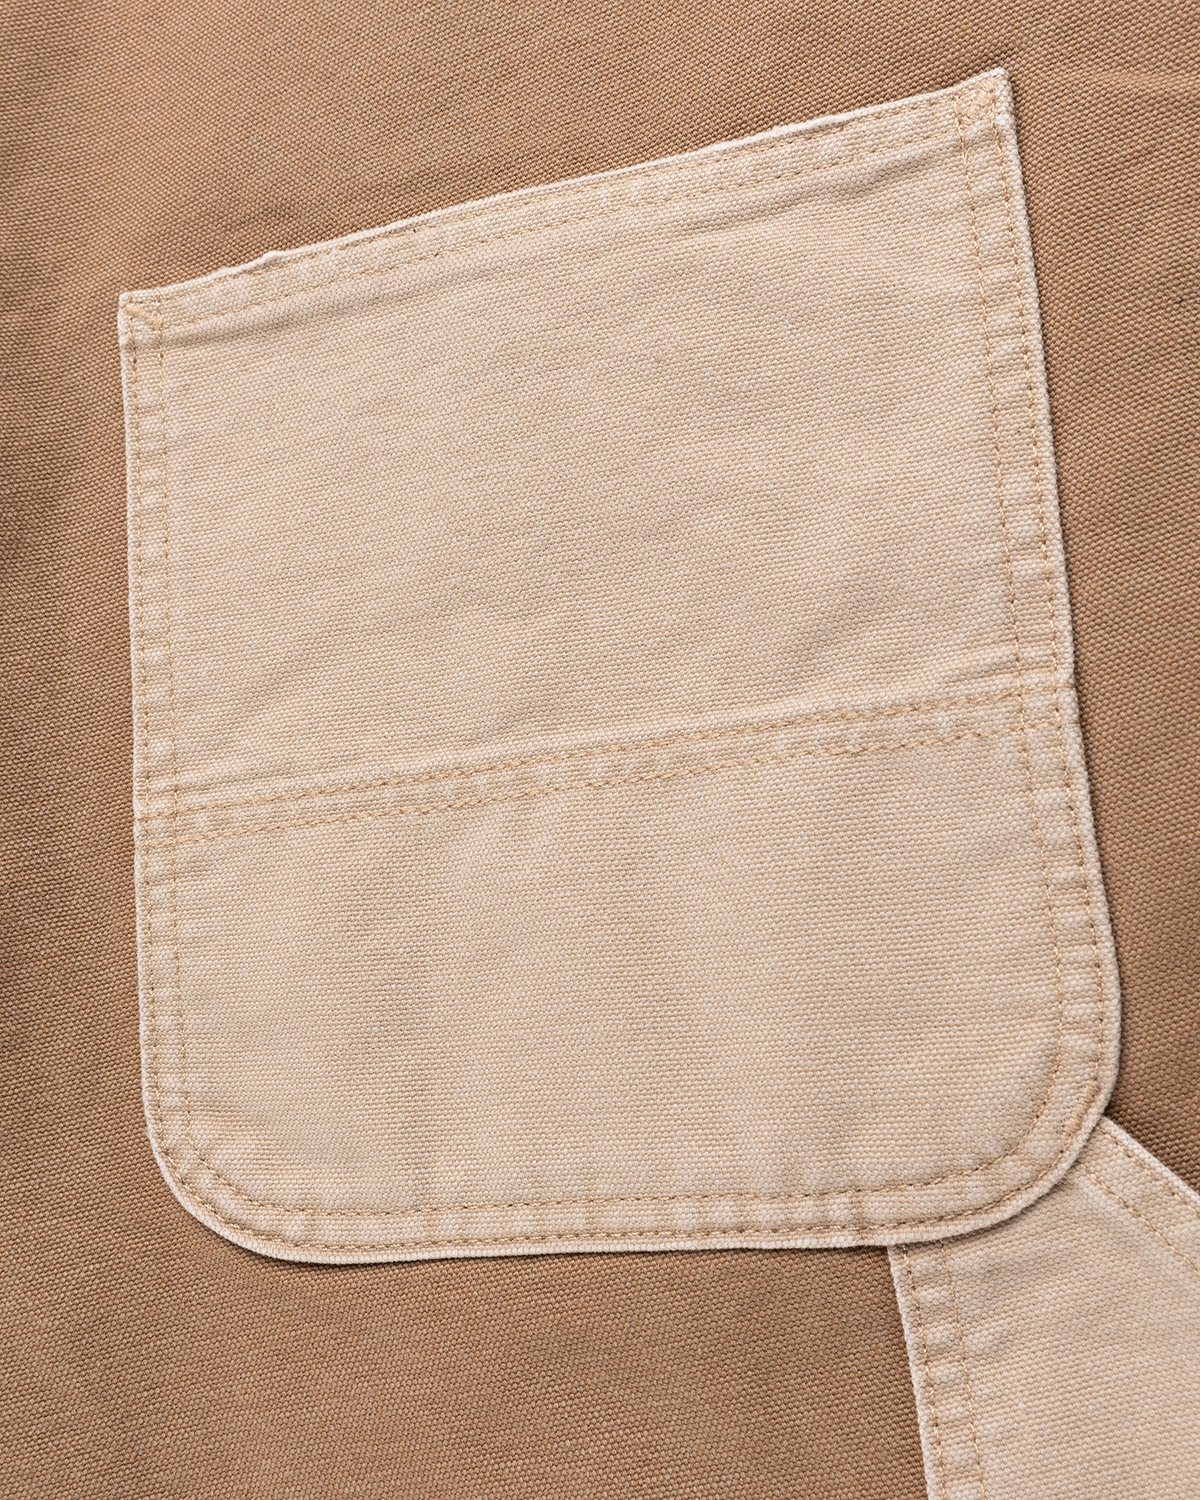 Carhartt WIP - Double Knee Bib Overall Dust Hamilton Brown - Clothing - Brown - Image 4